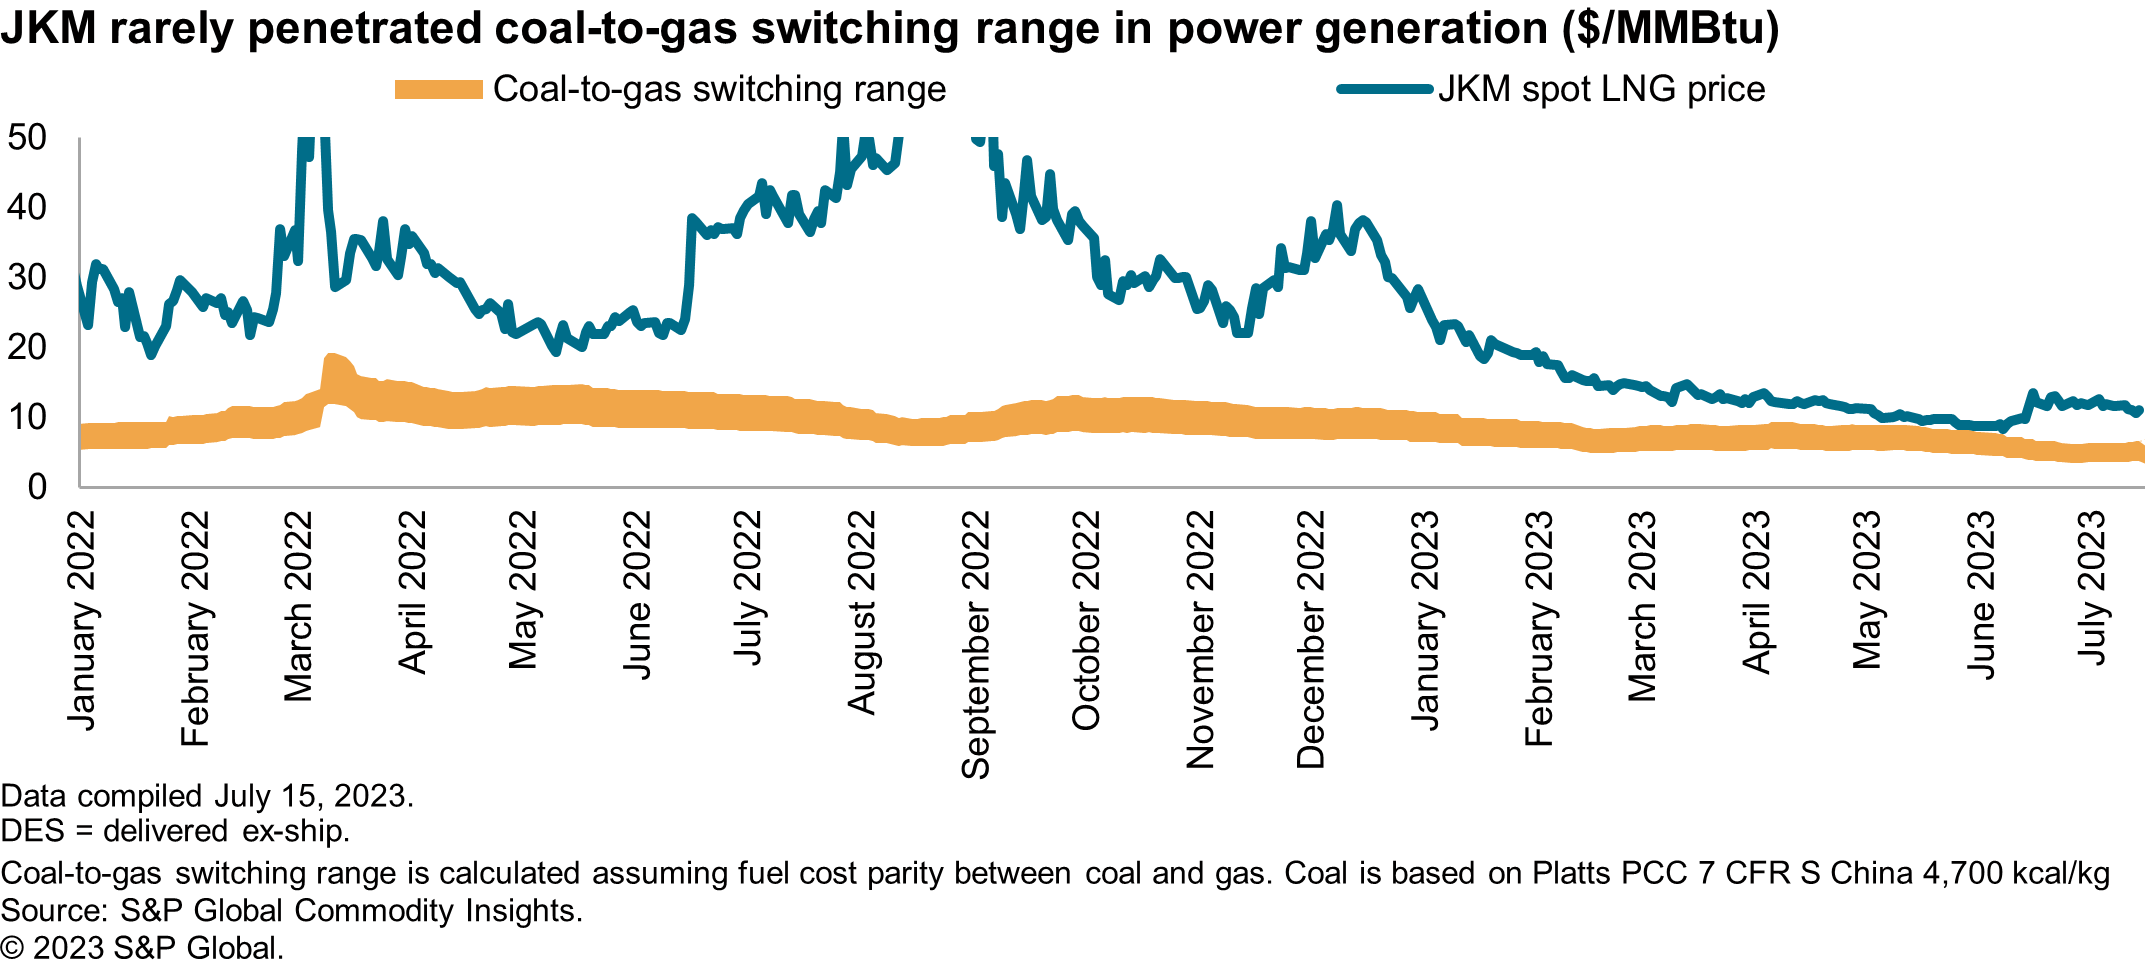 JKM rarely penetrated coal-to-gas switching range in power generation